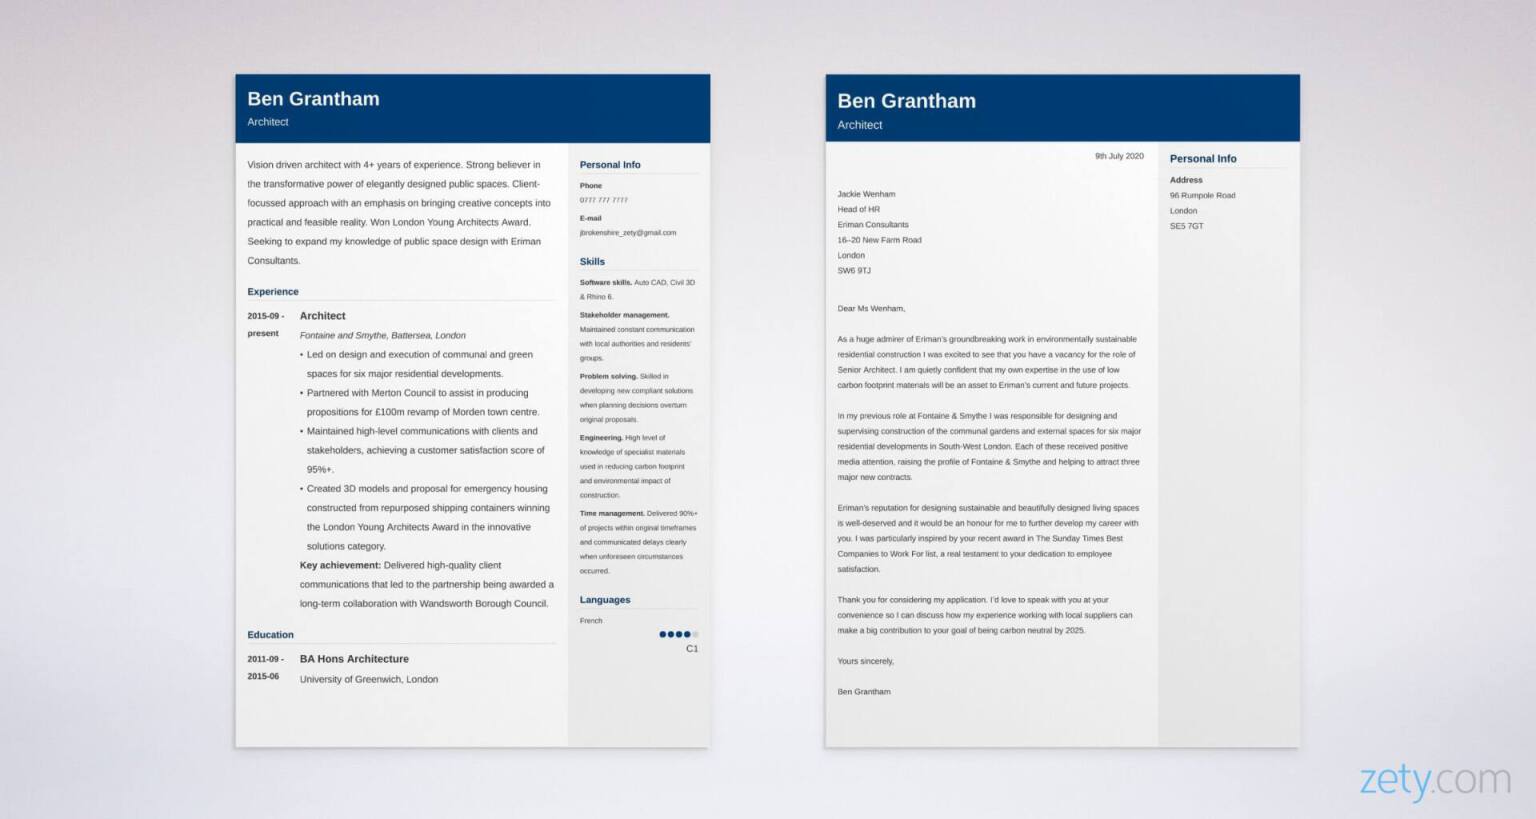 Architecture Cover Letter Examples Writing Guide